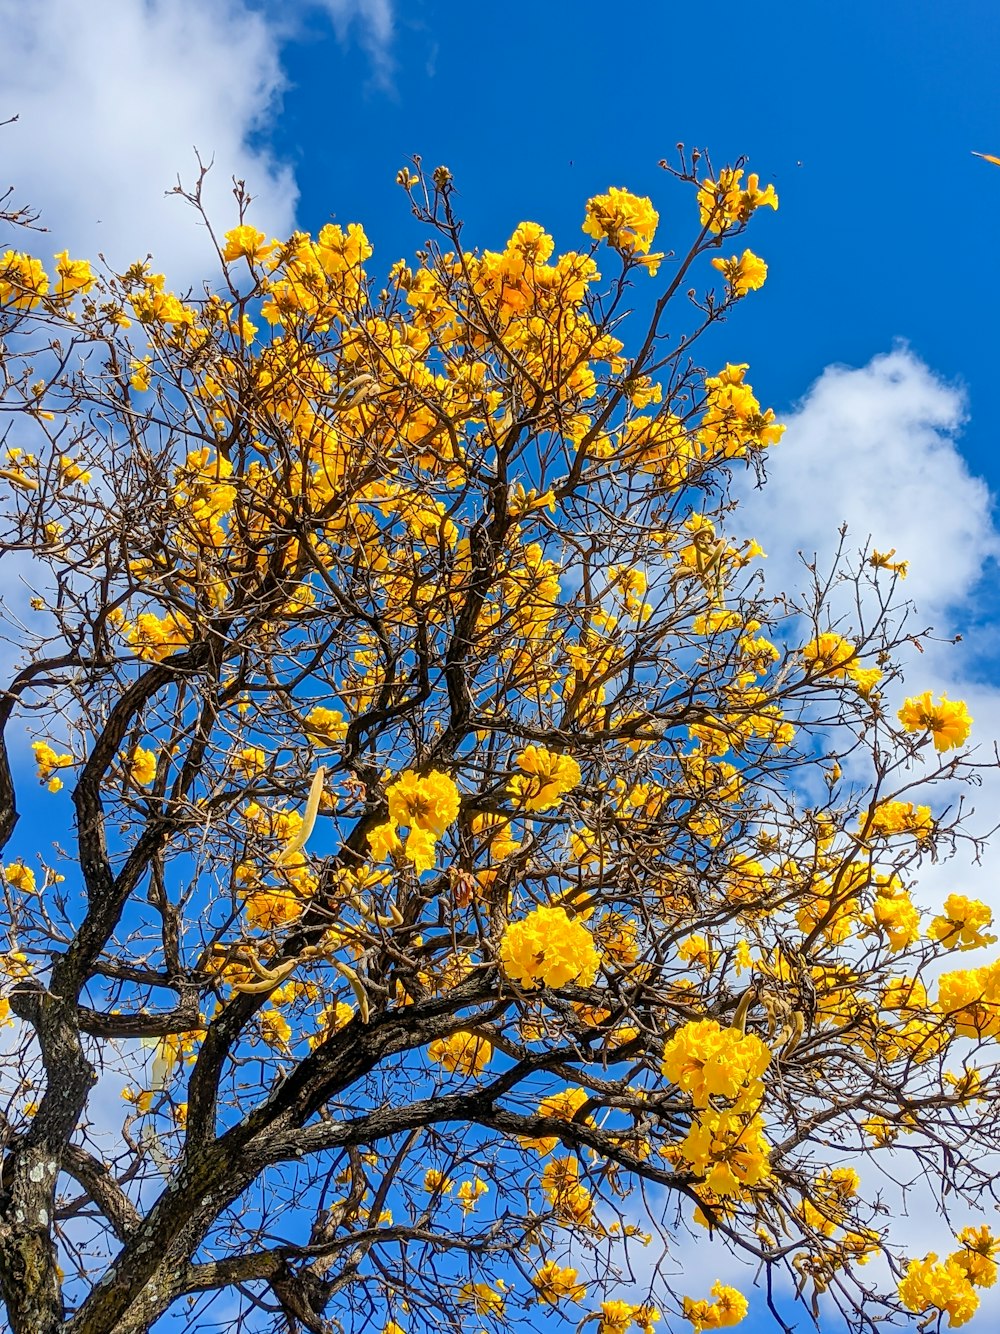 yellow leaves on tree under blue sky during daytime